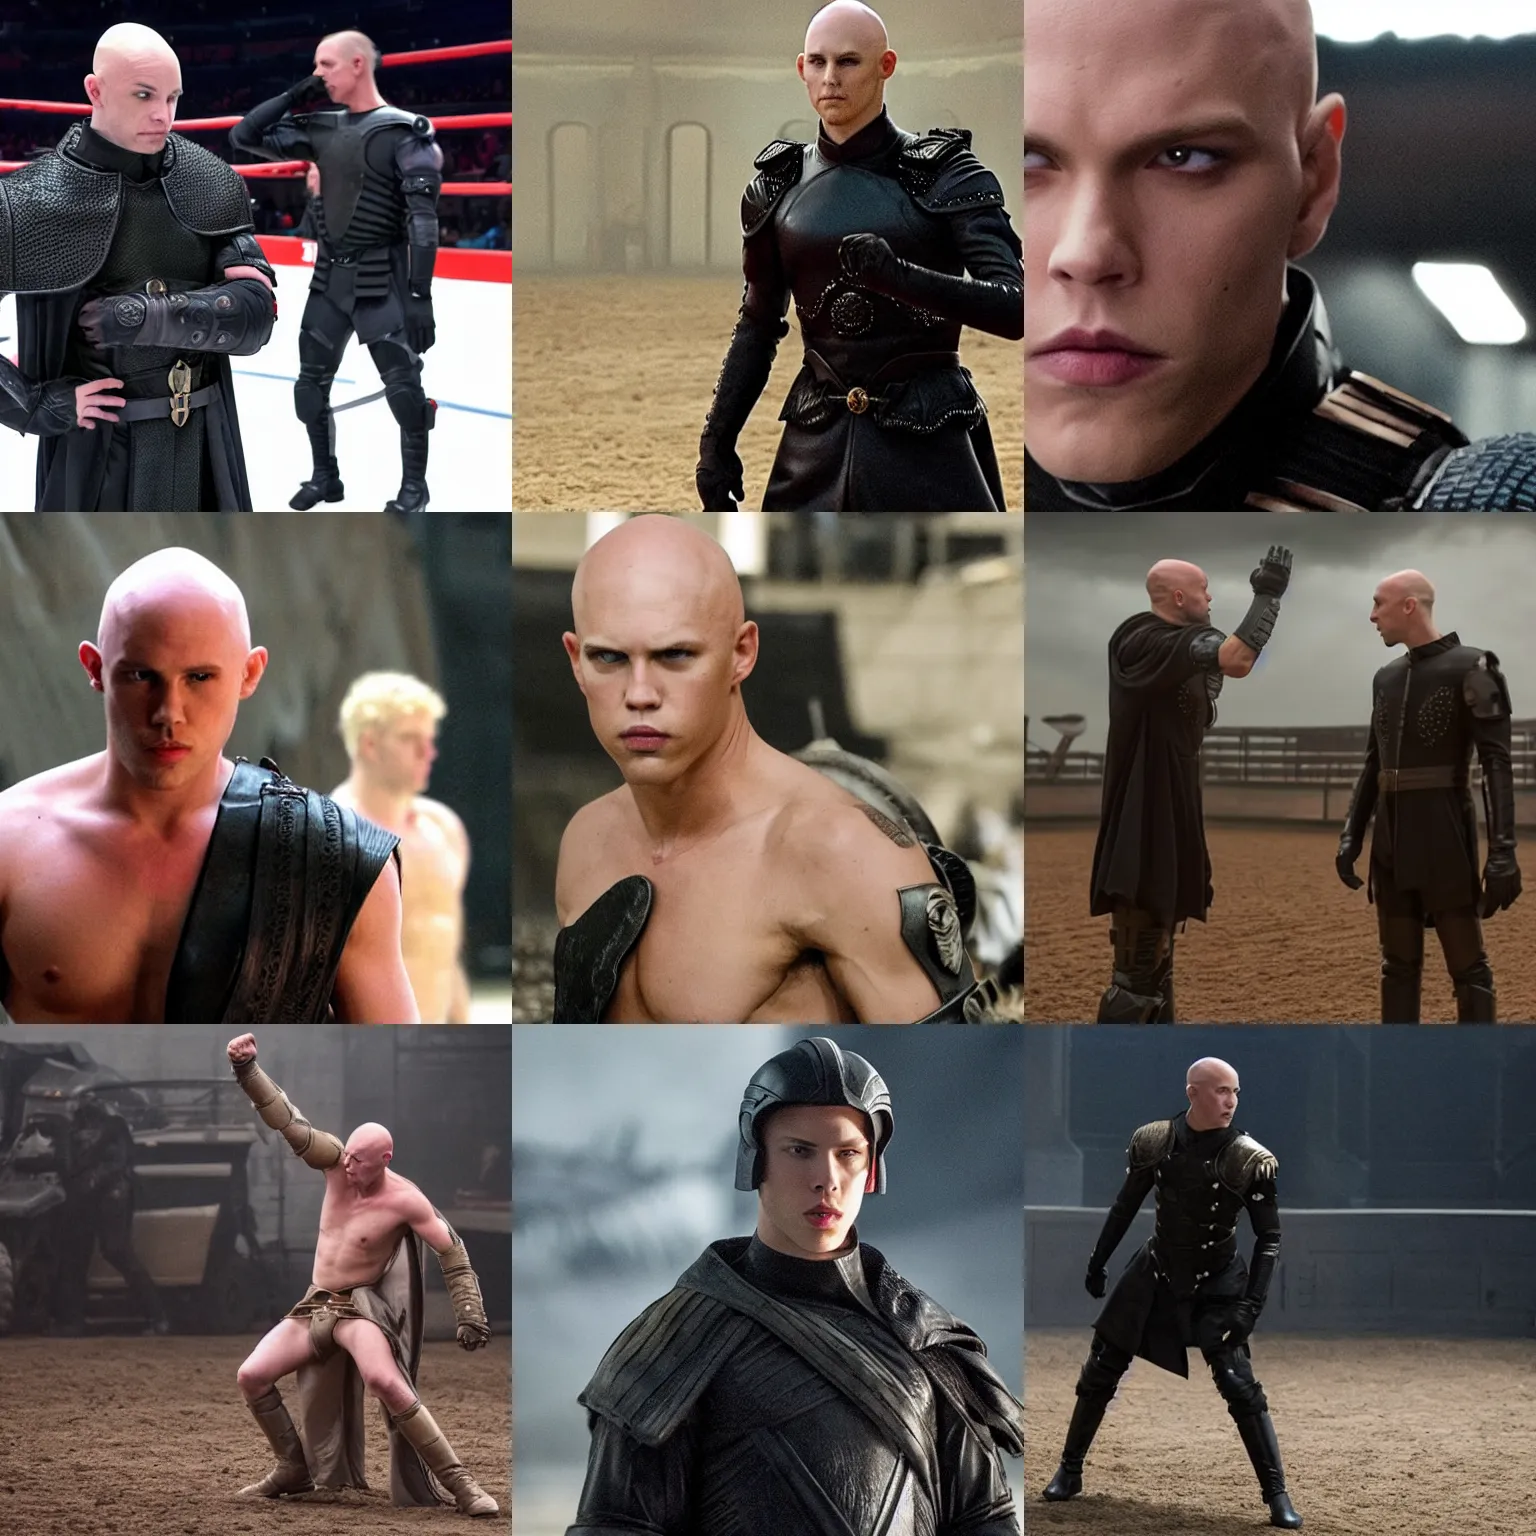 Prompt: bald ominous brooding Austin Butler as Feyd-Rautha Harkonnen fighting in an arena